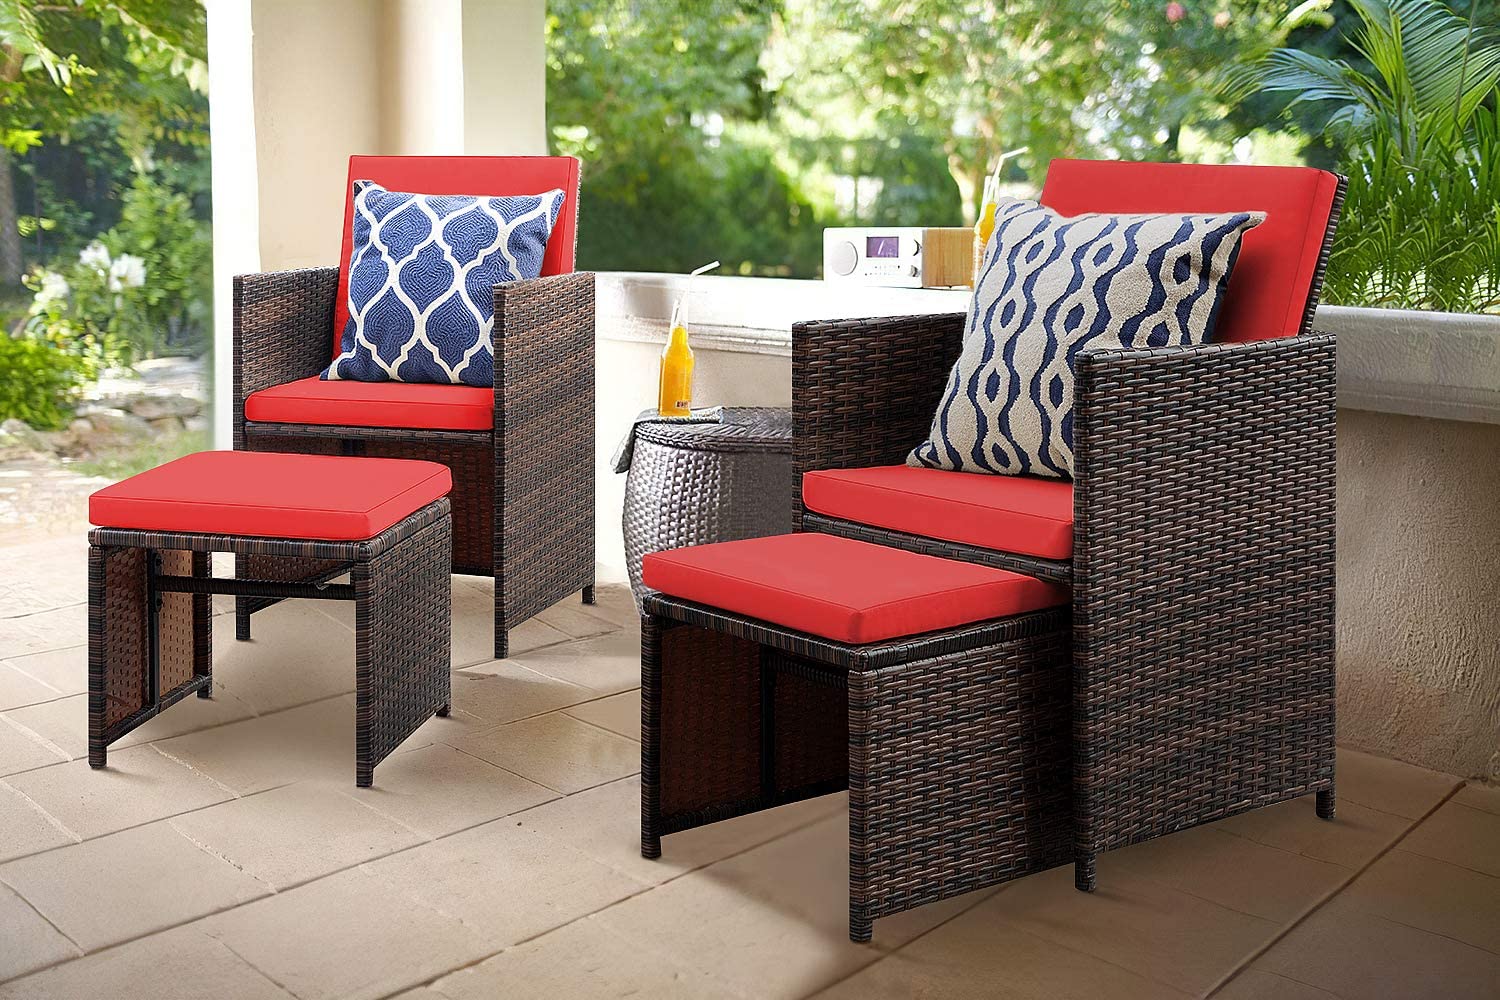 Lacoo 4 Pieces Patio Wicker Furniture Conversation Set with Two Ottomans Collapsible Balcony Porch Furniture, Red - image 2 of 3